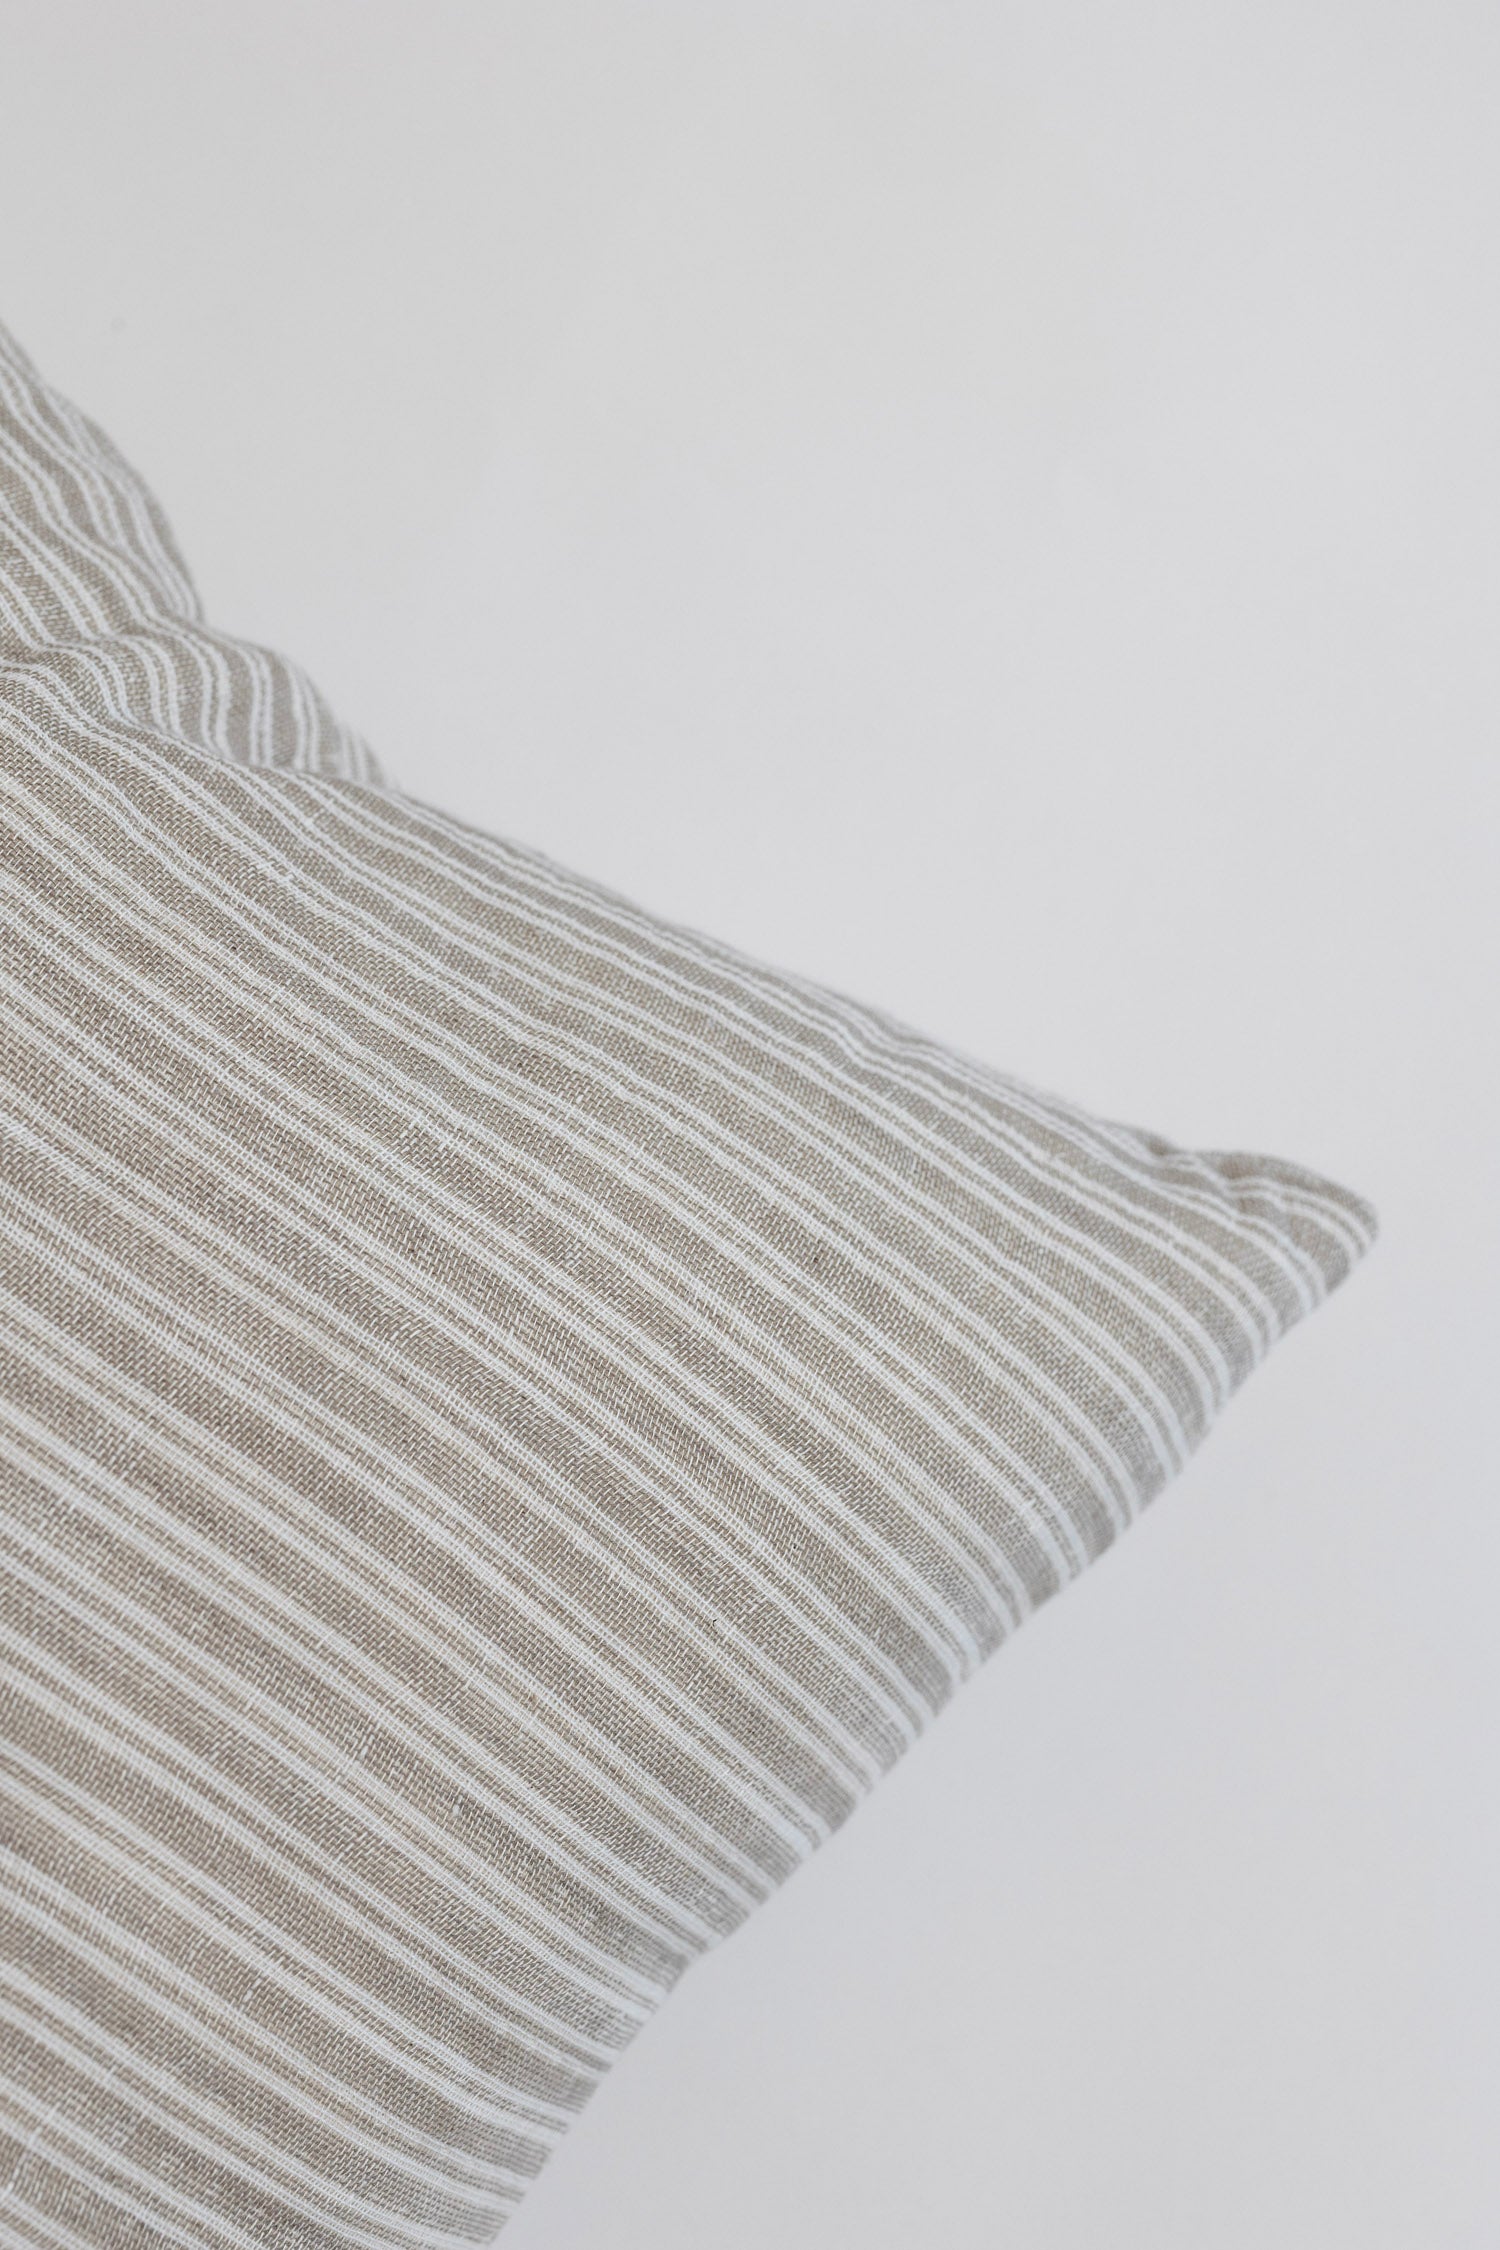 Carden Striped Pillow - Natural